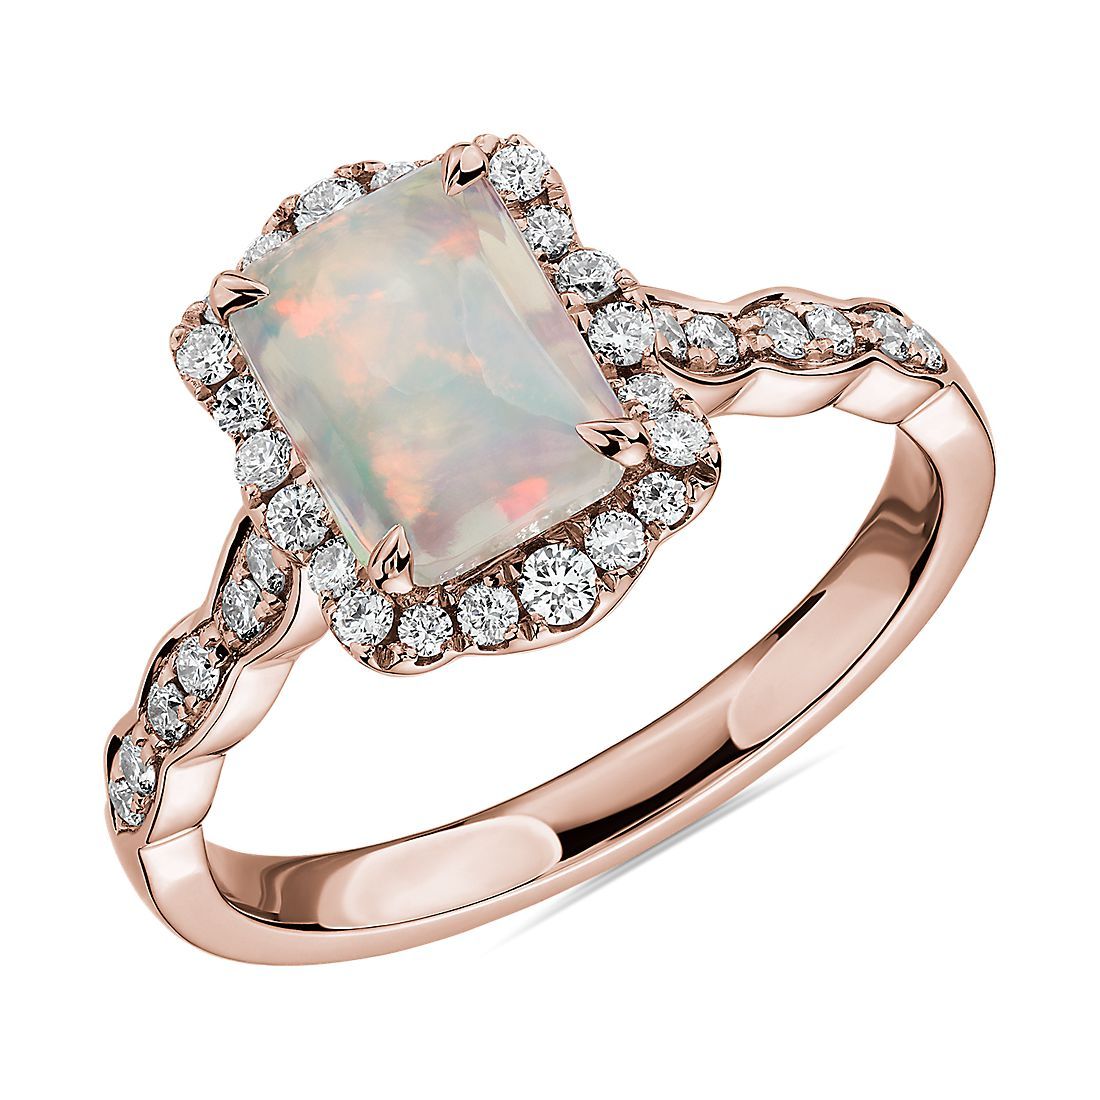 Emerald Cut Opal Ring with Diamond Halo in 14k Rose Gold | Blue Nile | Blue Nile